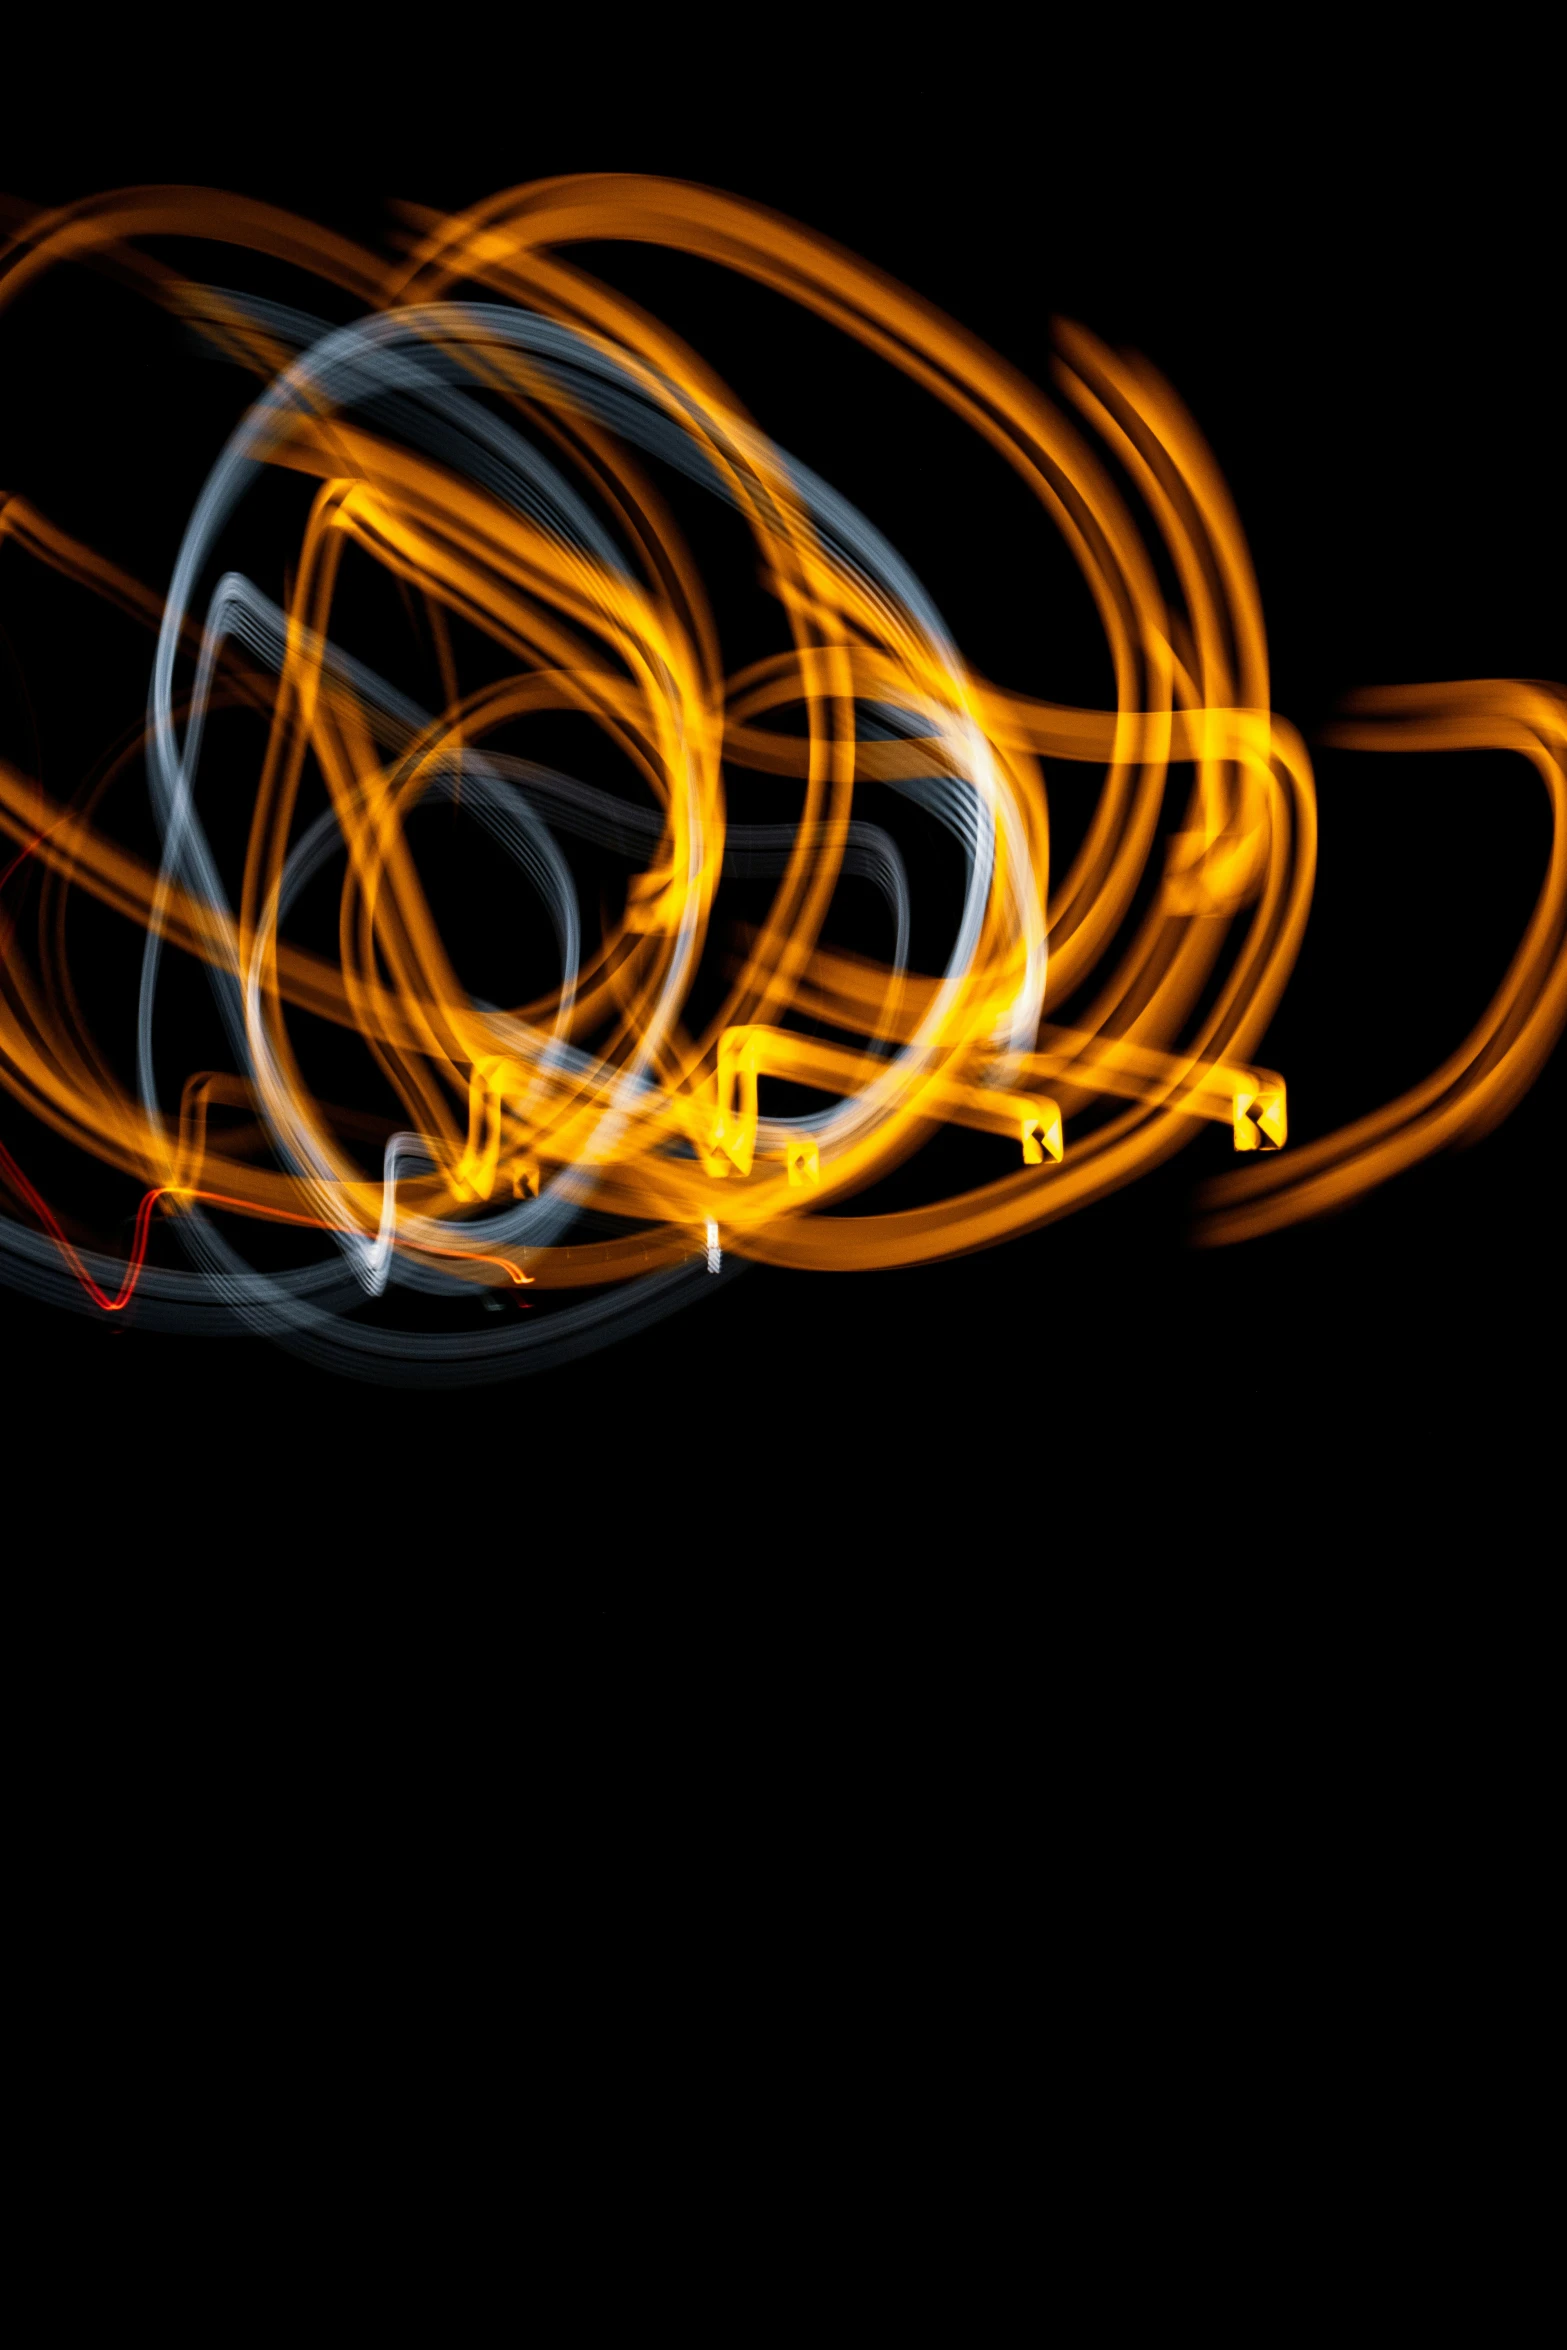 a couple of orange and white swirls against a black background